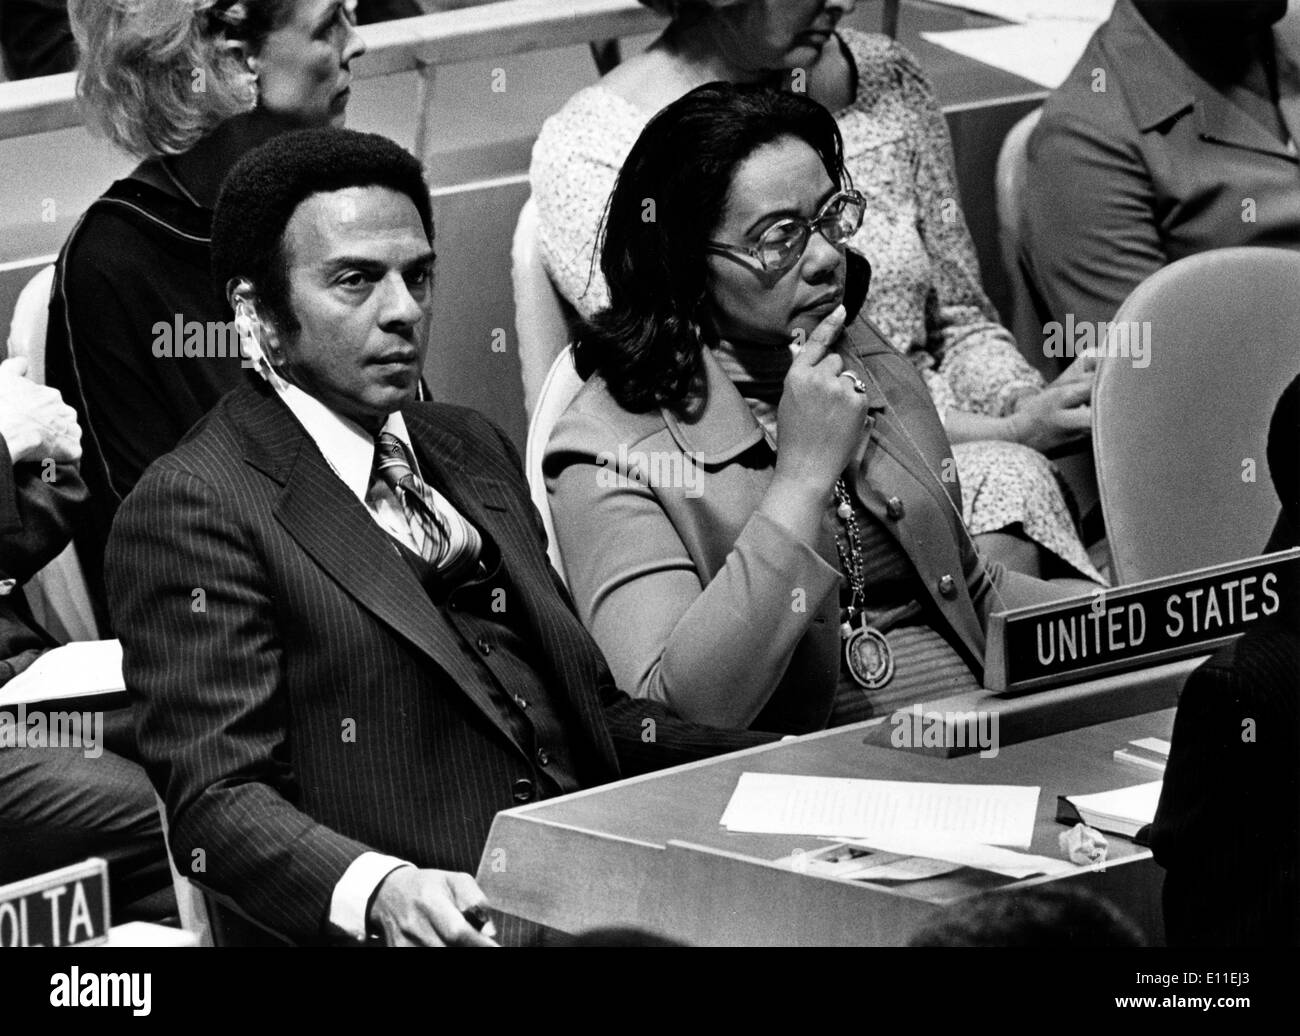 Sep 20, 1977; New York, NY, USA; U.S. Ambassador ANDREW YOUNG and CORETTA SCOTT KING, widow of Reverend Martin Luther King Jr., Stock Photo